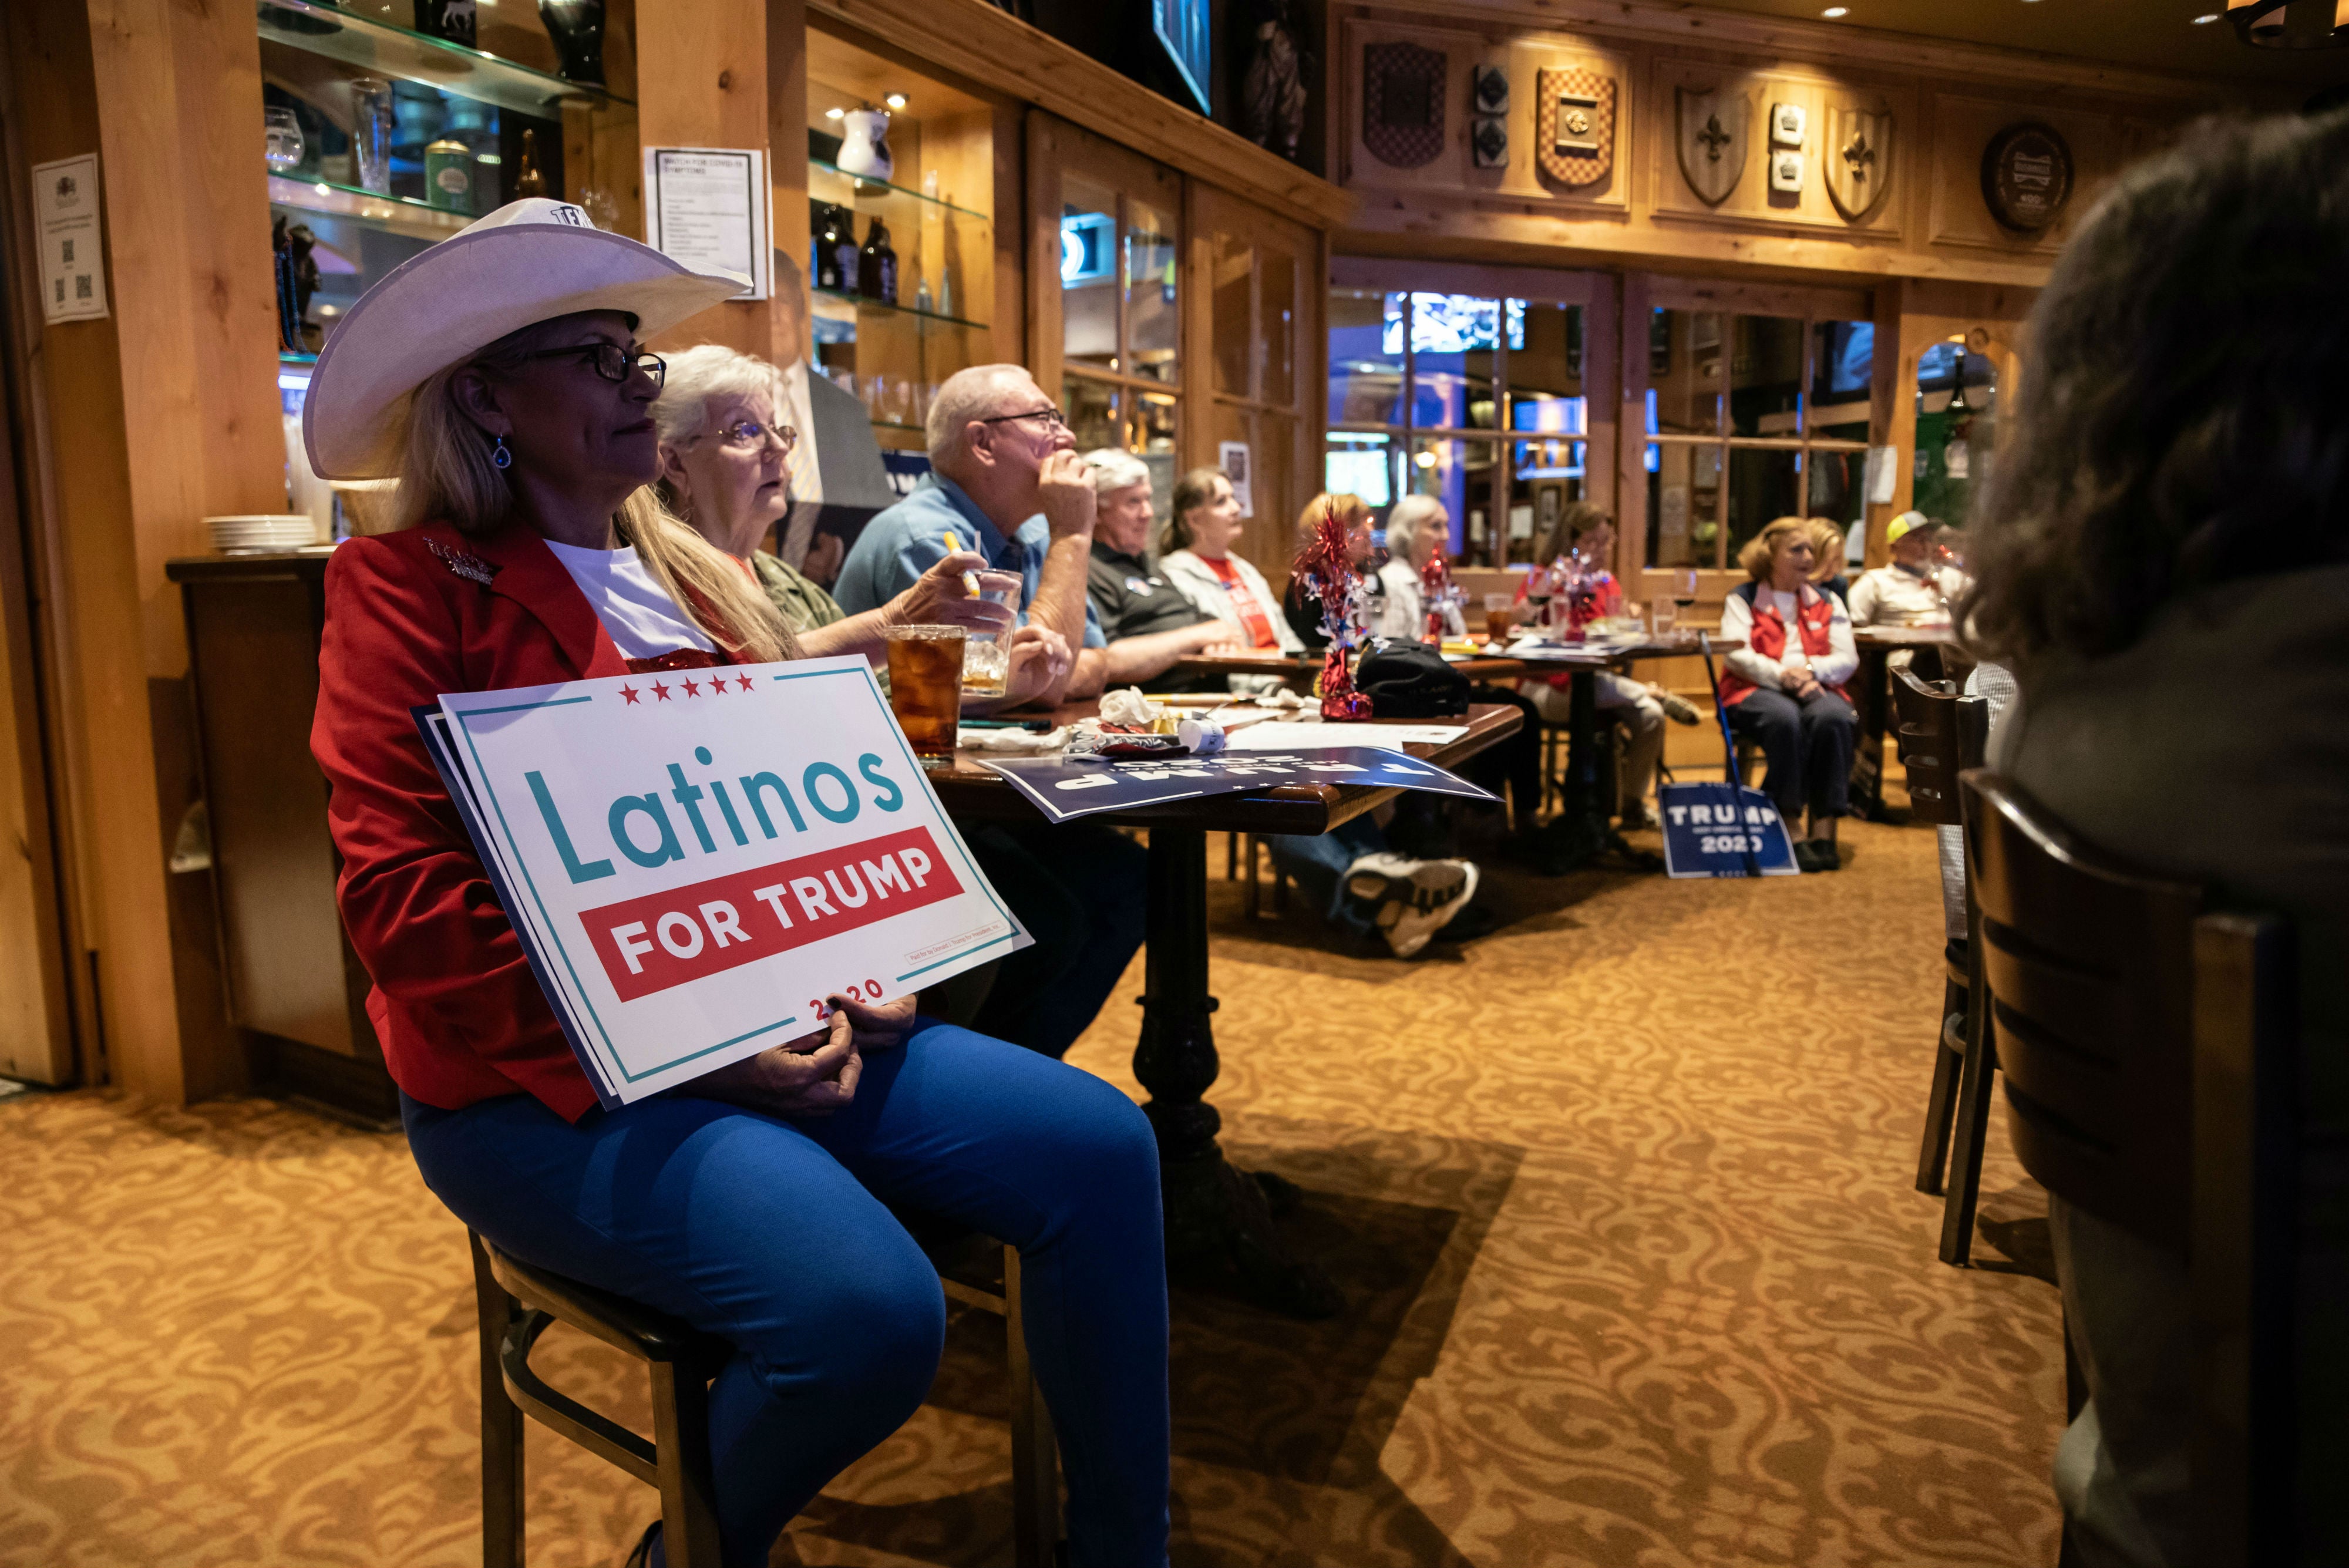 Trump gained significant ground among Latinos